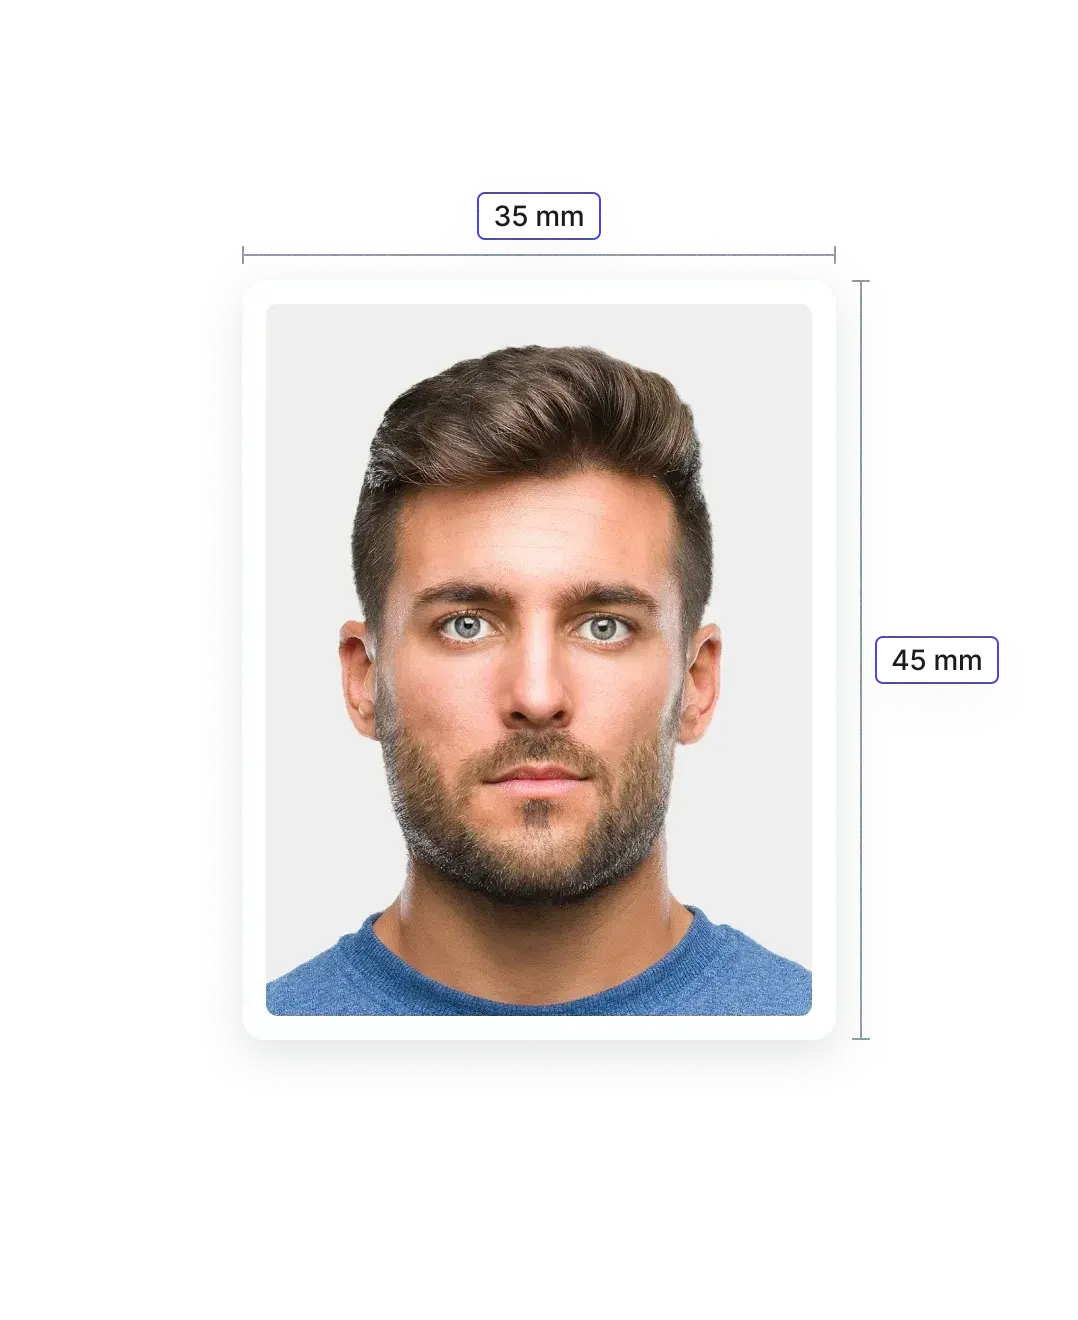 Great Britain Visa Photo: Size and Requirements